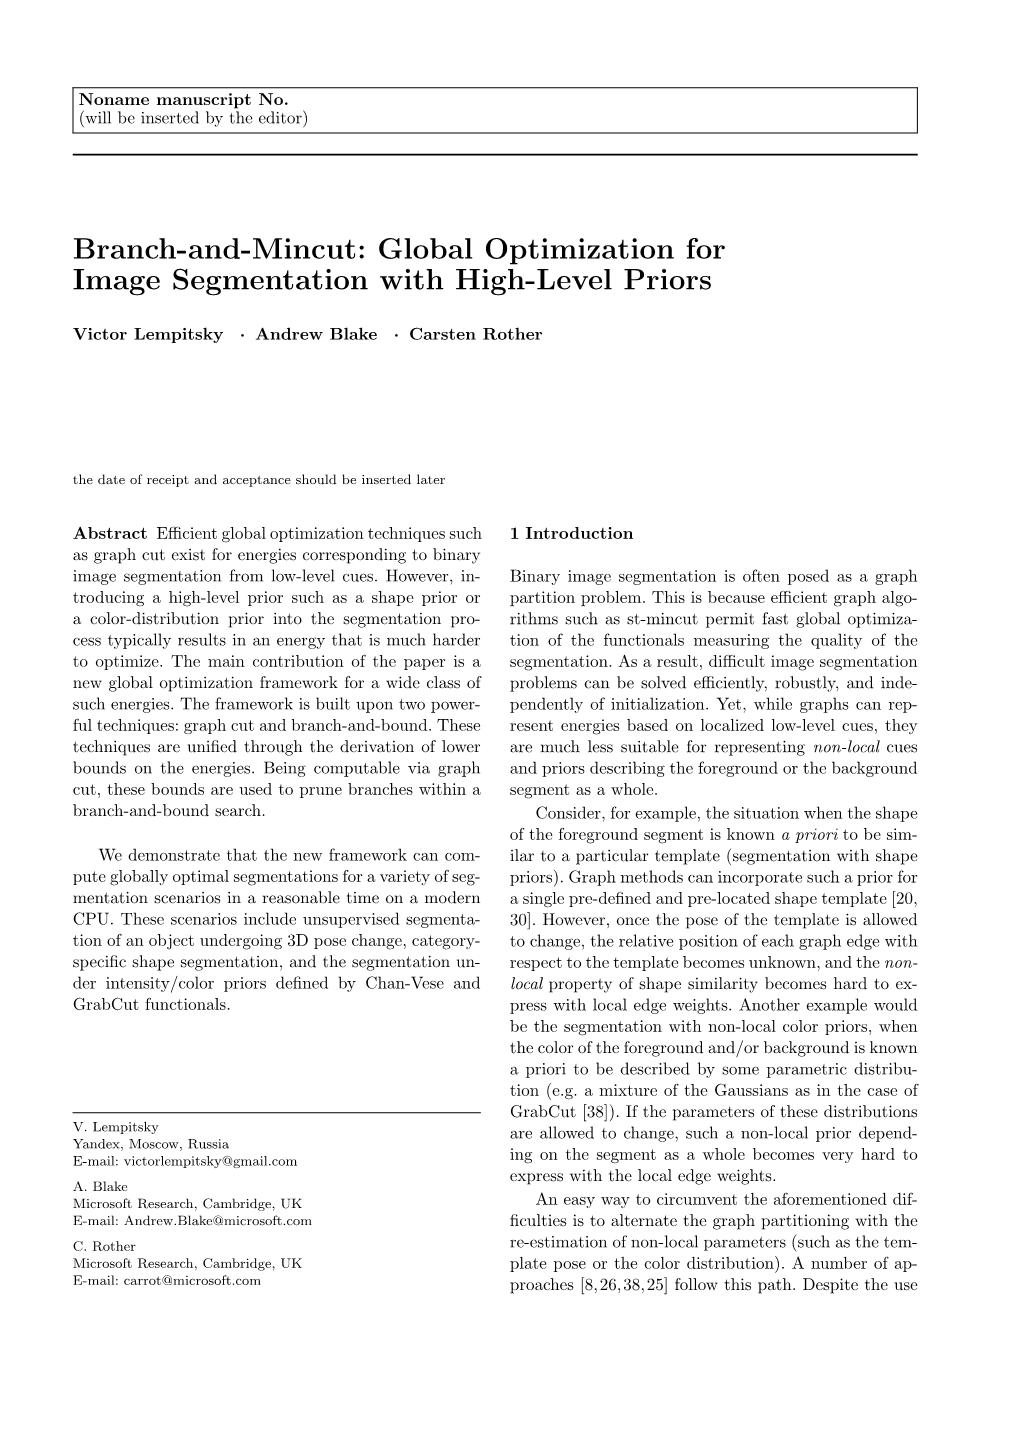 Global Optimization for Image Segmentation with High-Level Priors